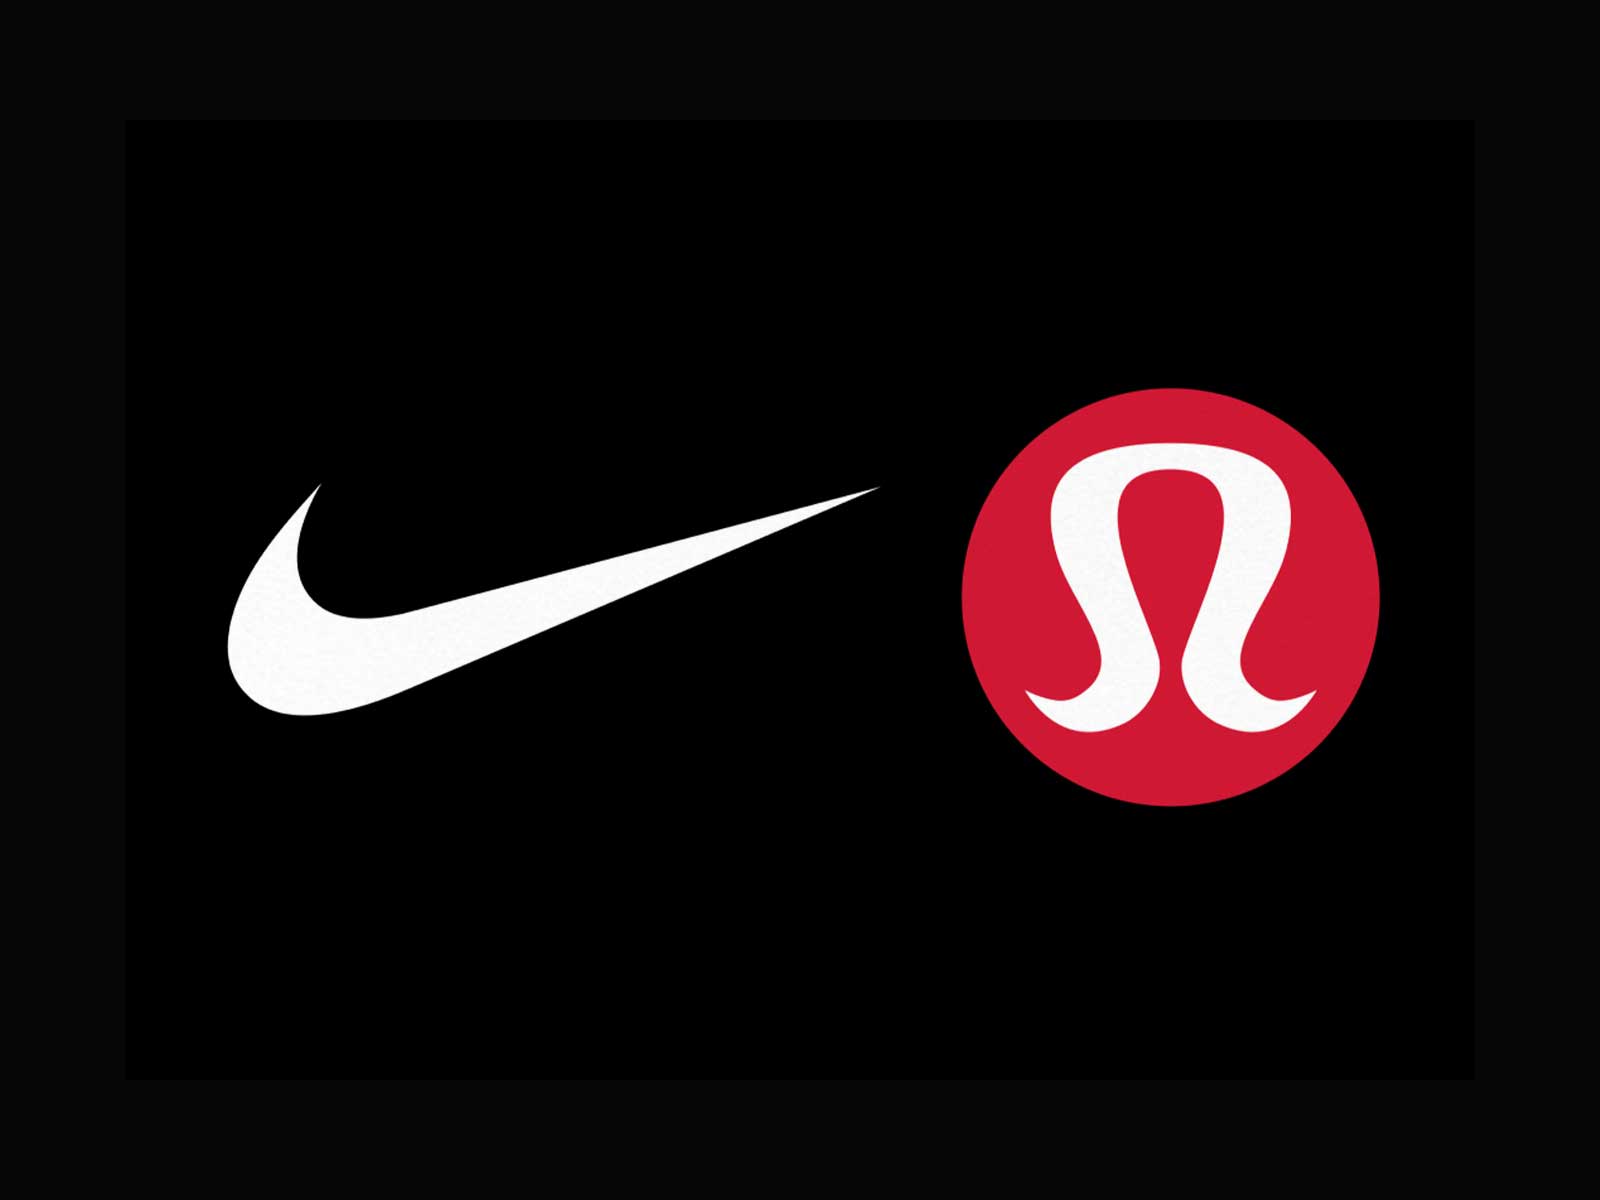 Nike sues Lululemon for copying its Flyknit technology